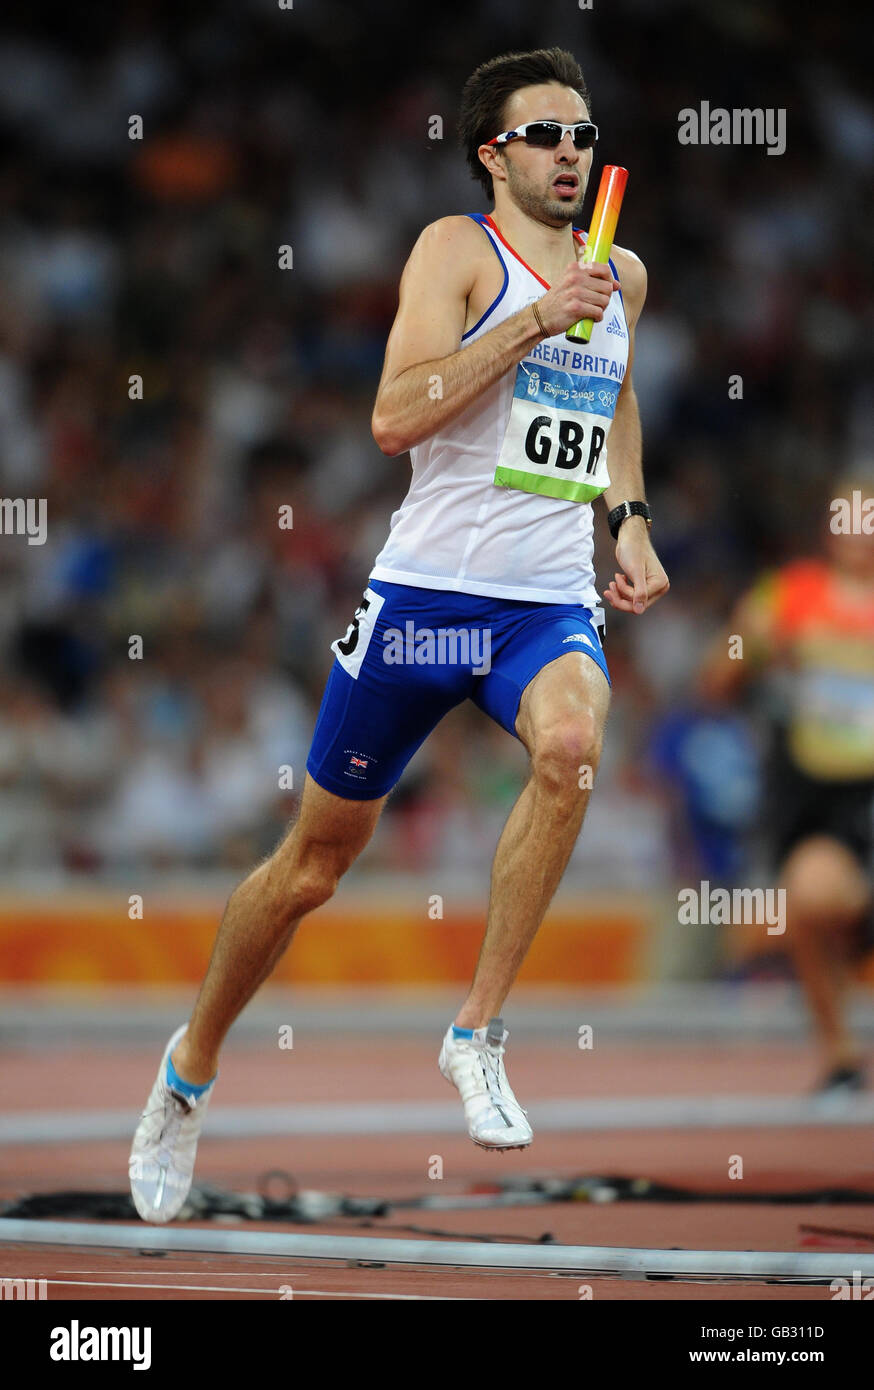 Great Britain's Martyn Rooney in action in the Men's 4x400m relay heats at the National Stadium in Beijing during the 2008 Beijing Olympic Games in China. Stock Photo